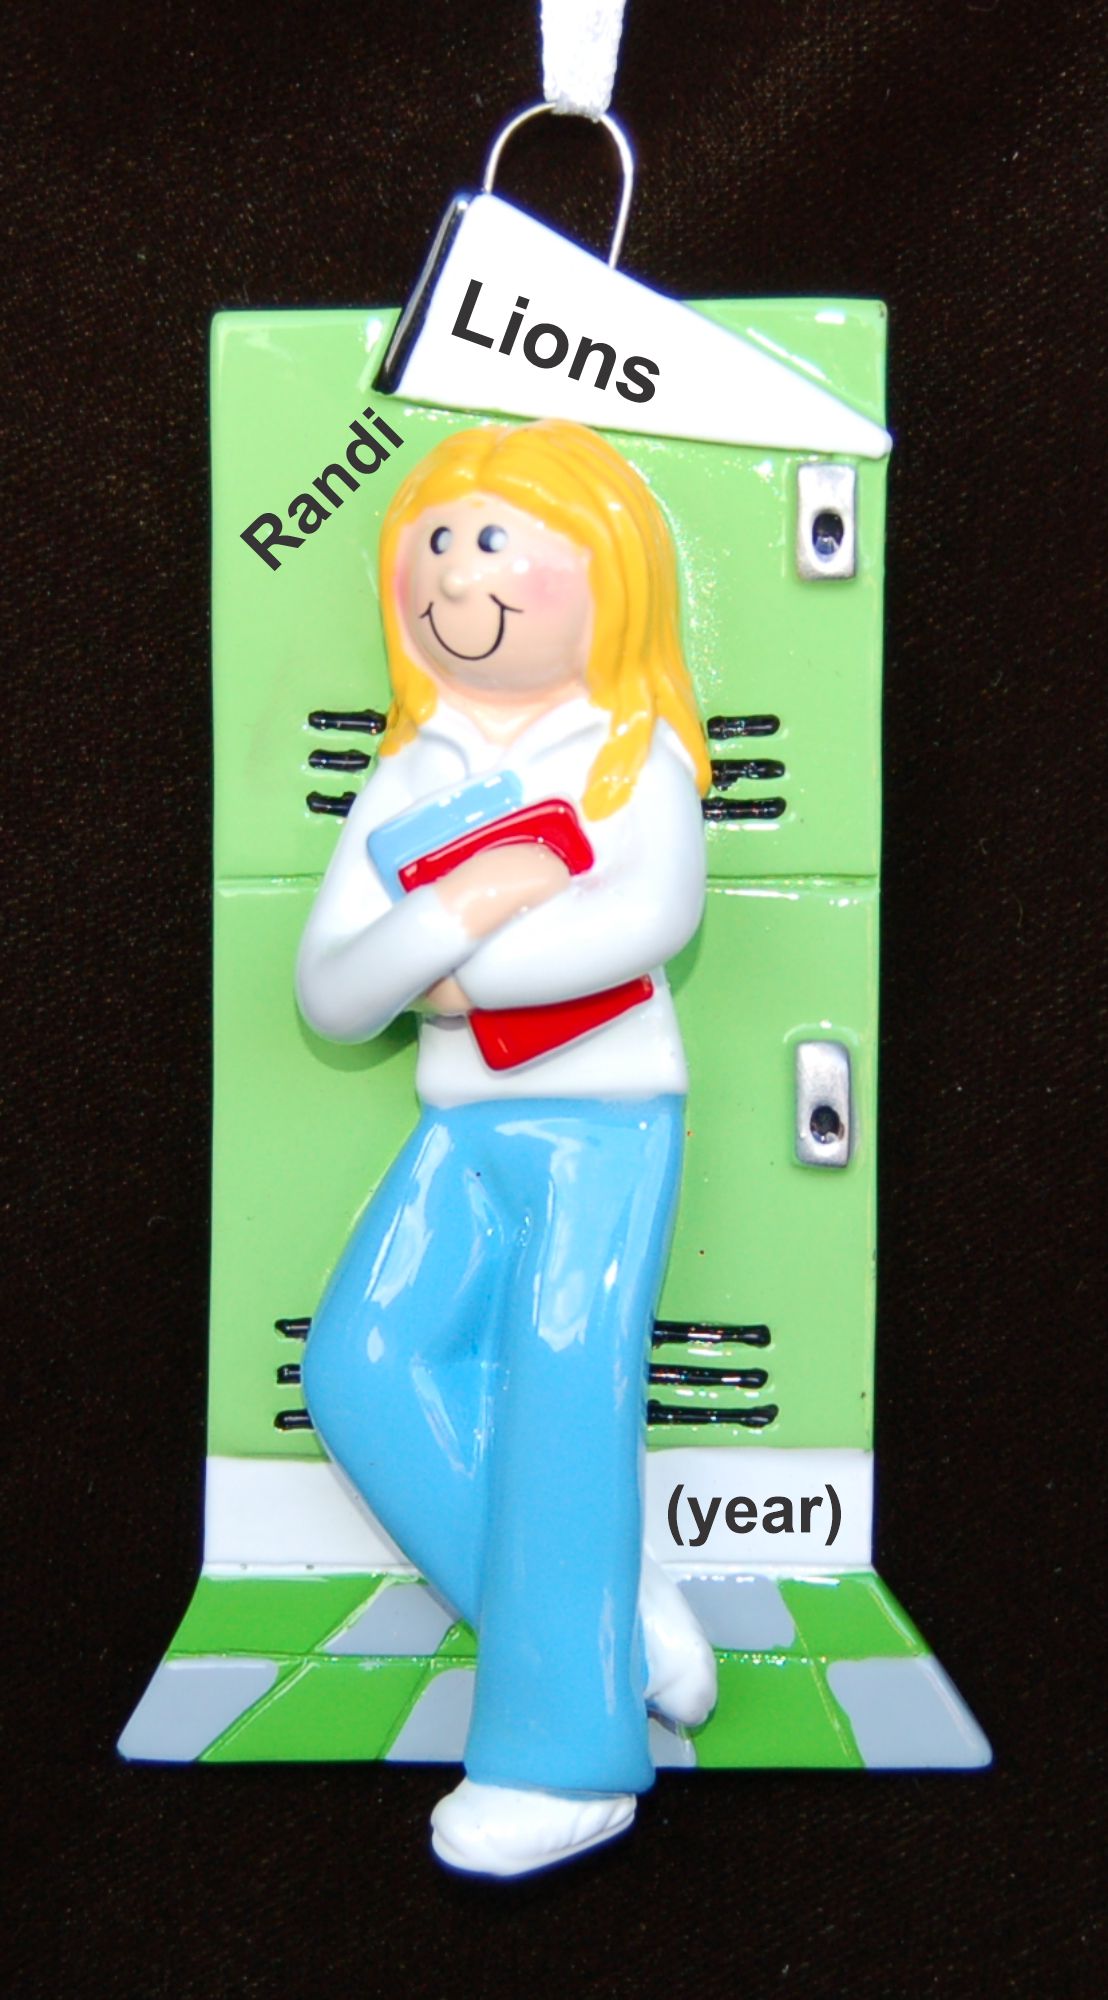 Teen Christmas Ornament Female Blond Personalized by RussellRhodes.com